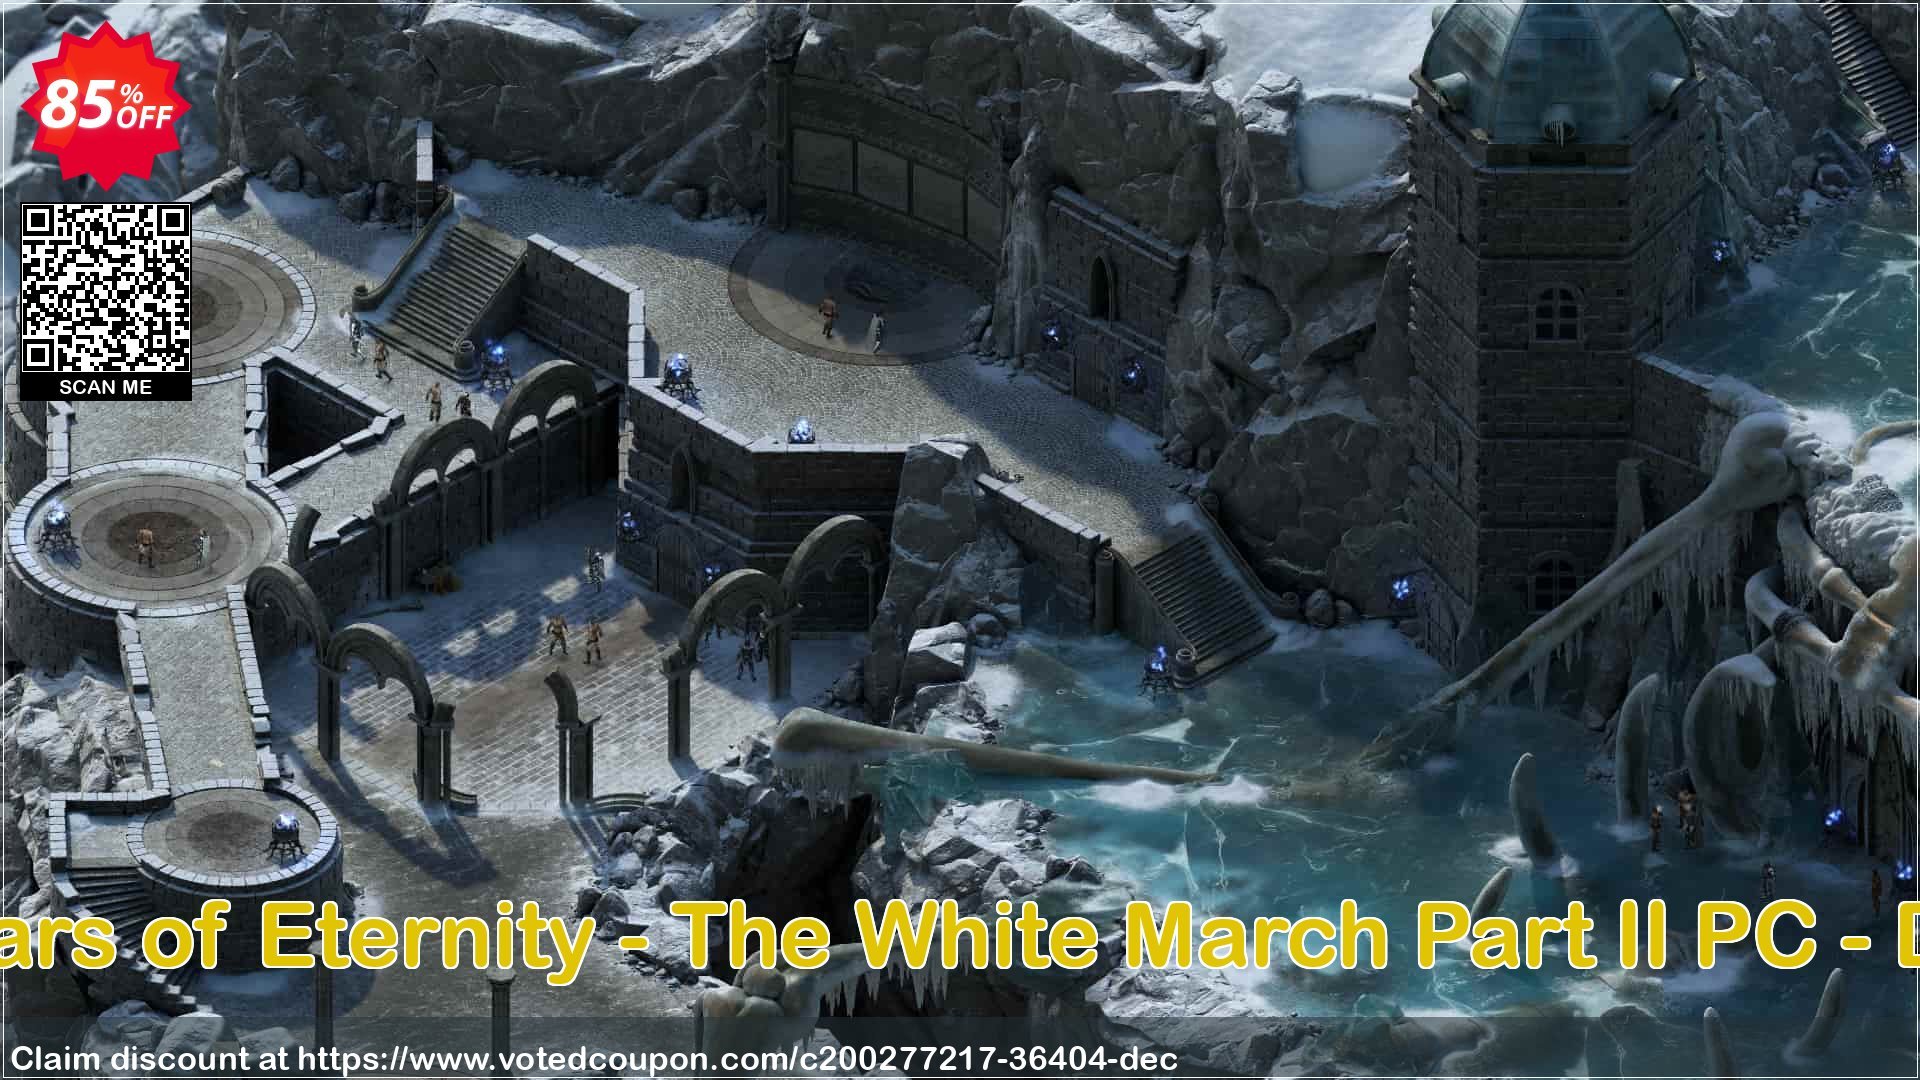 Pillars of Eternity - The White March Part II PC - DLC Coupon Code Apr 2024, 85% OFF - VotedCoupon